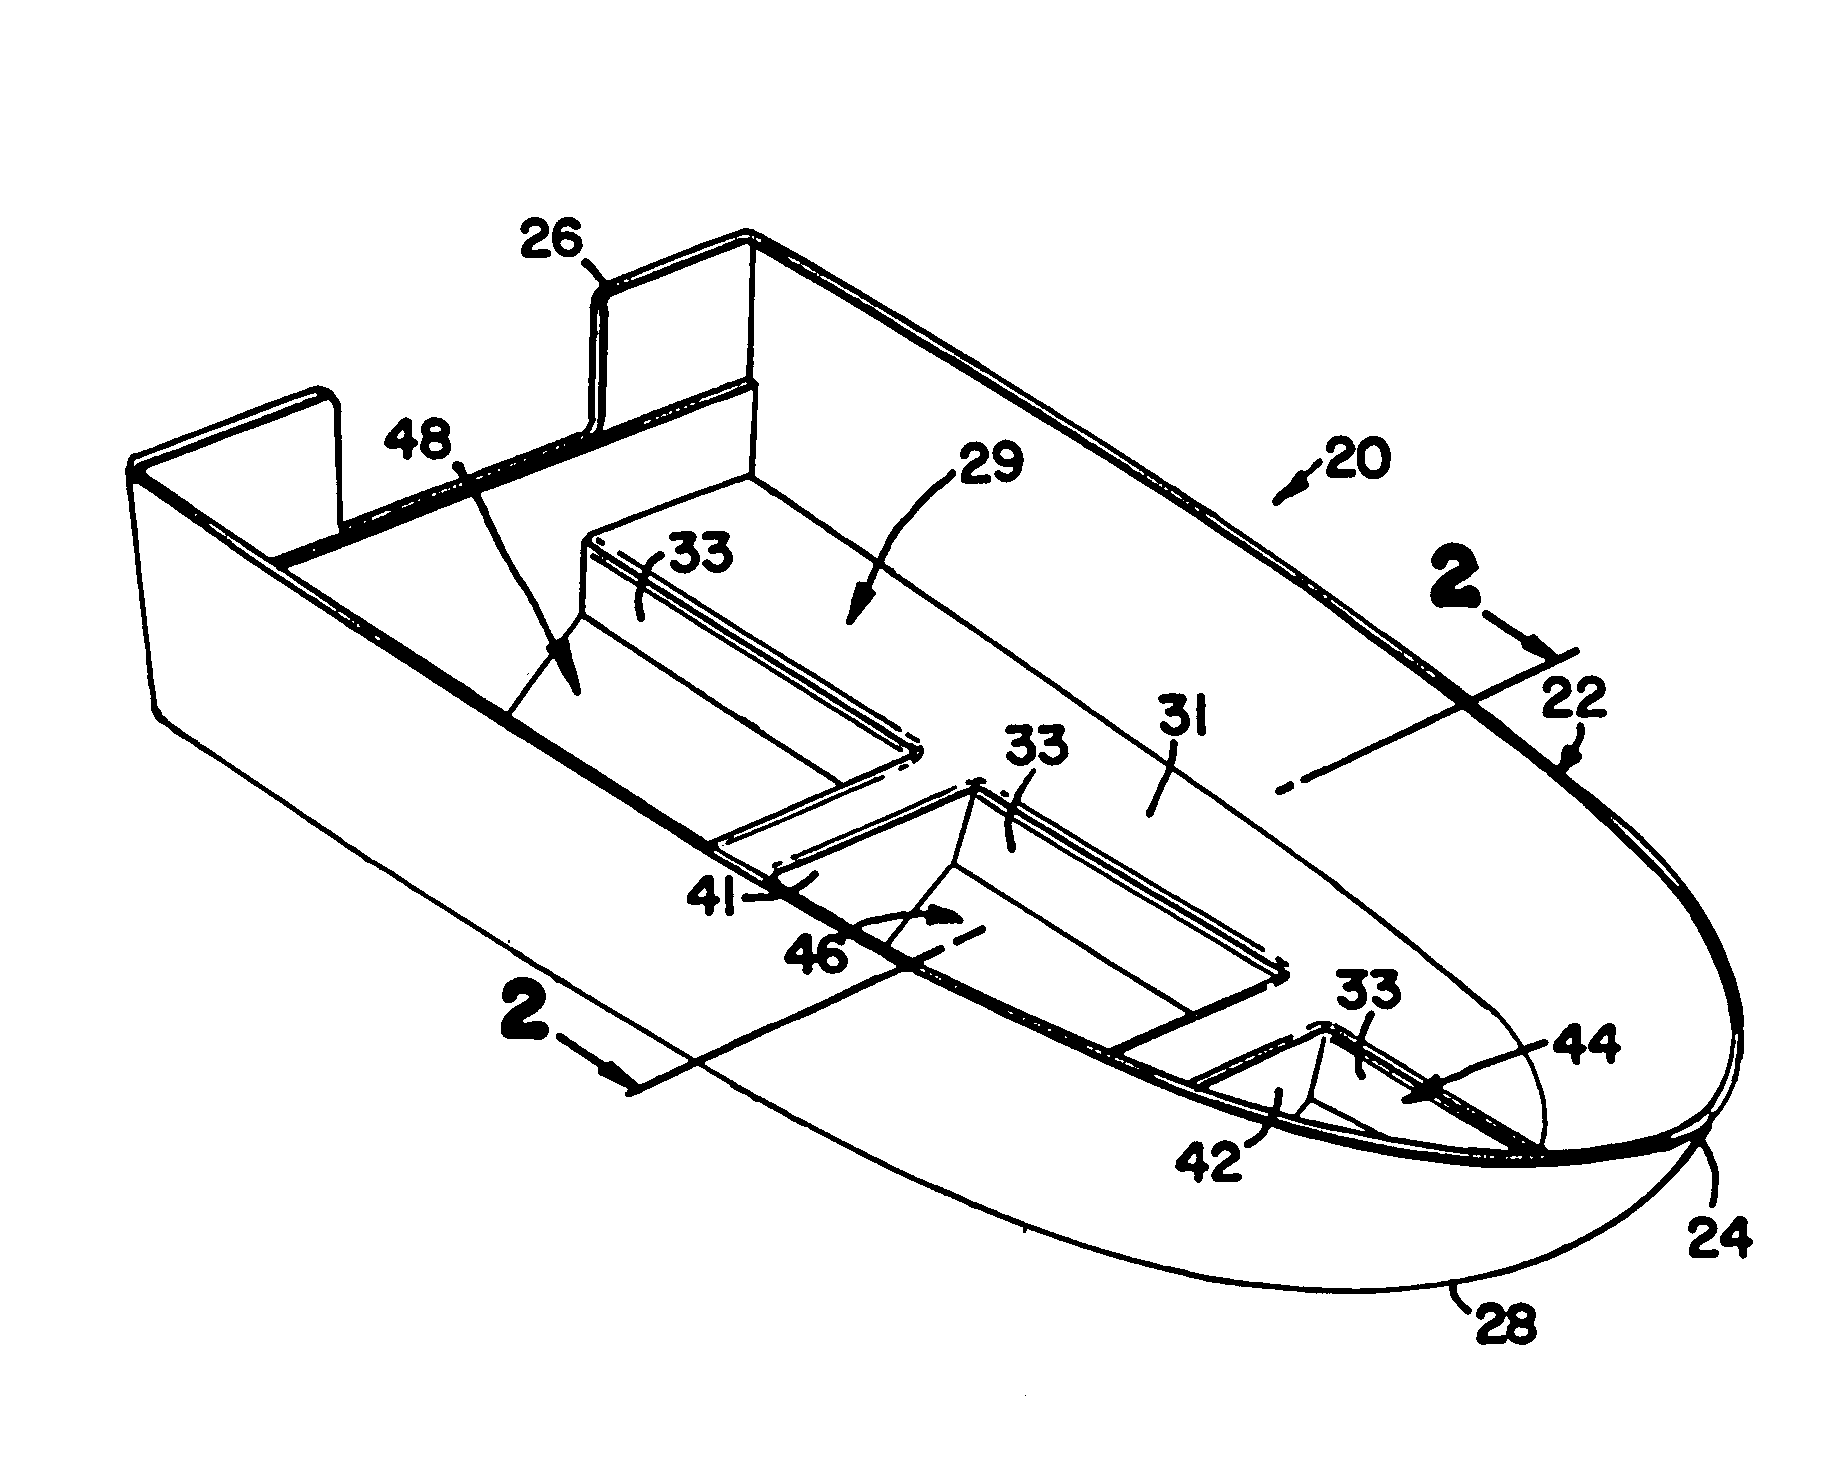 Boat and method for manufacturing using resin transfer molding